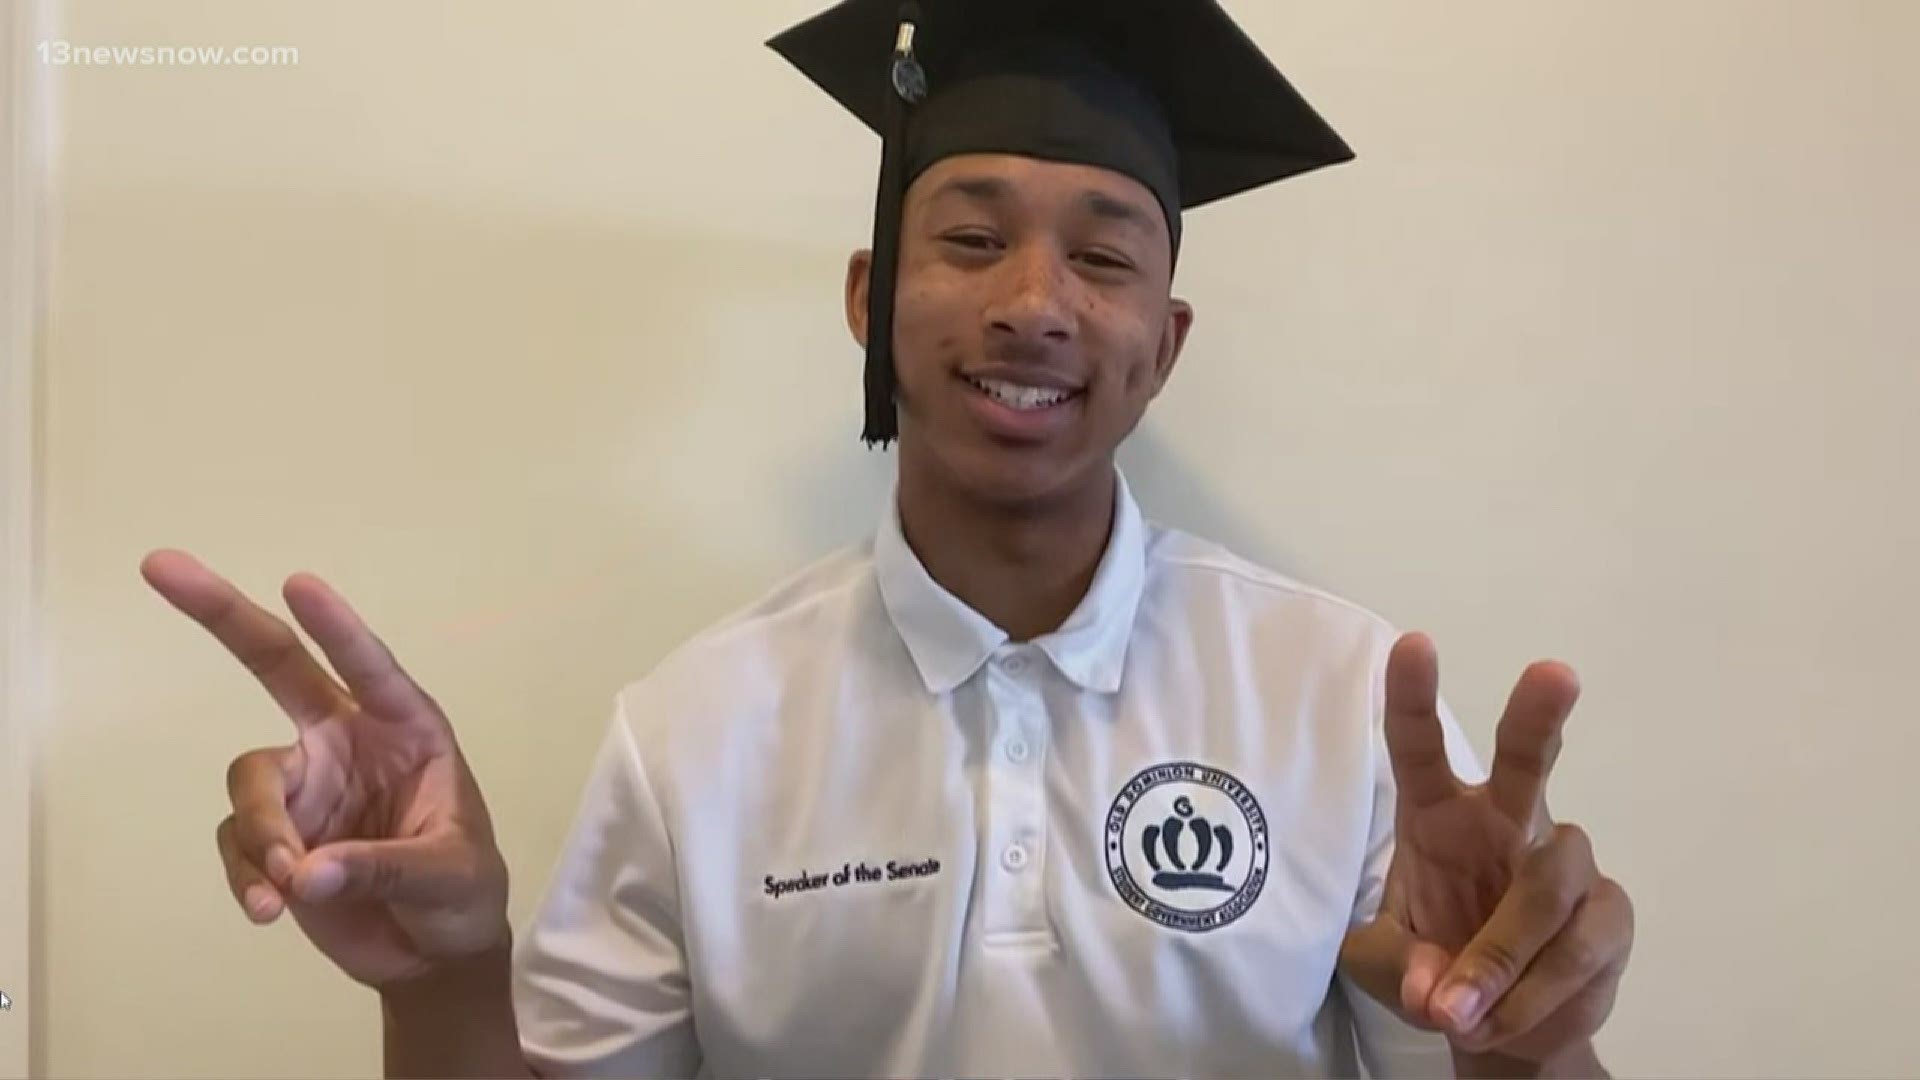 ODU celebrates Class of 2020 with virtual commencement | 13newsnow.com